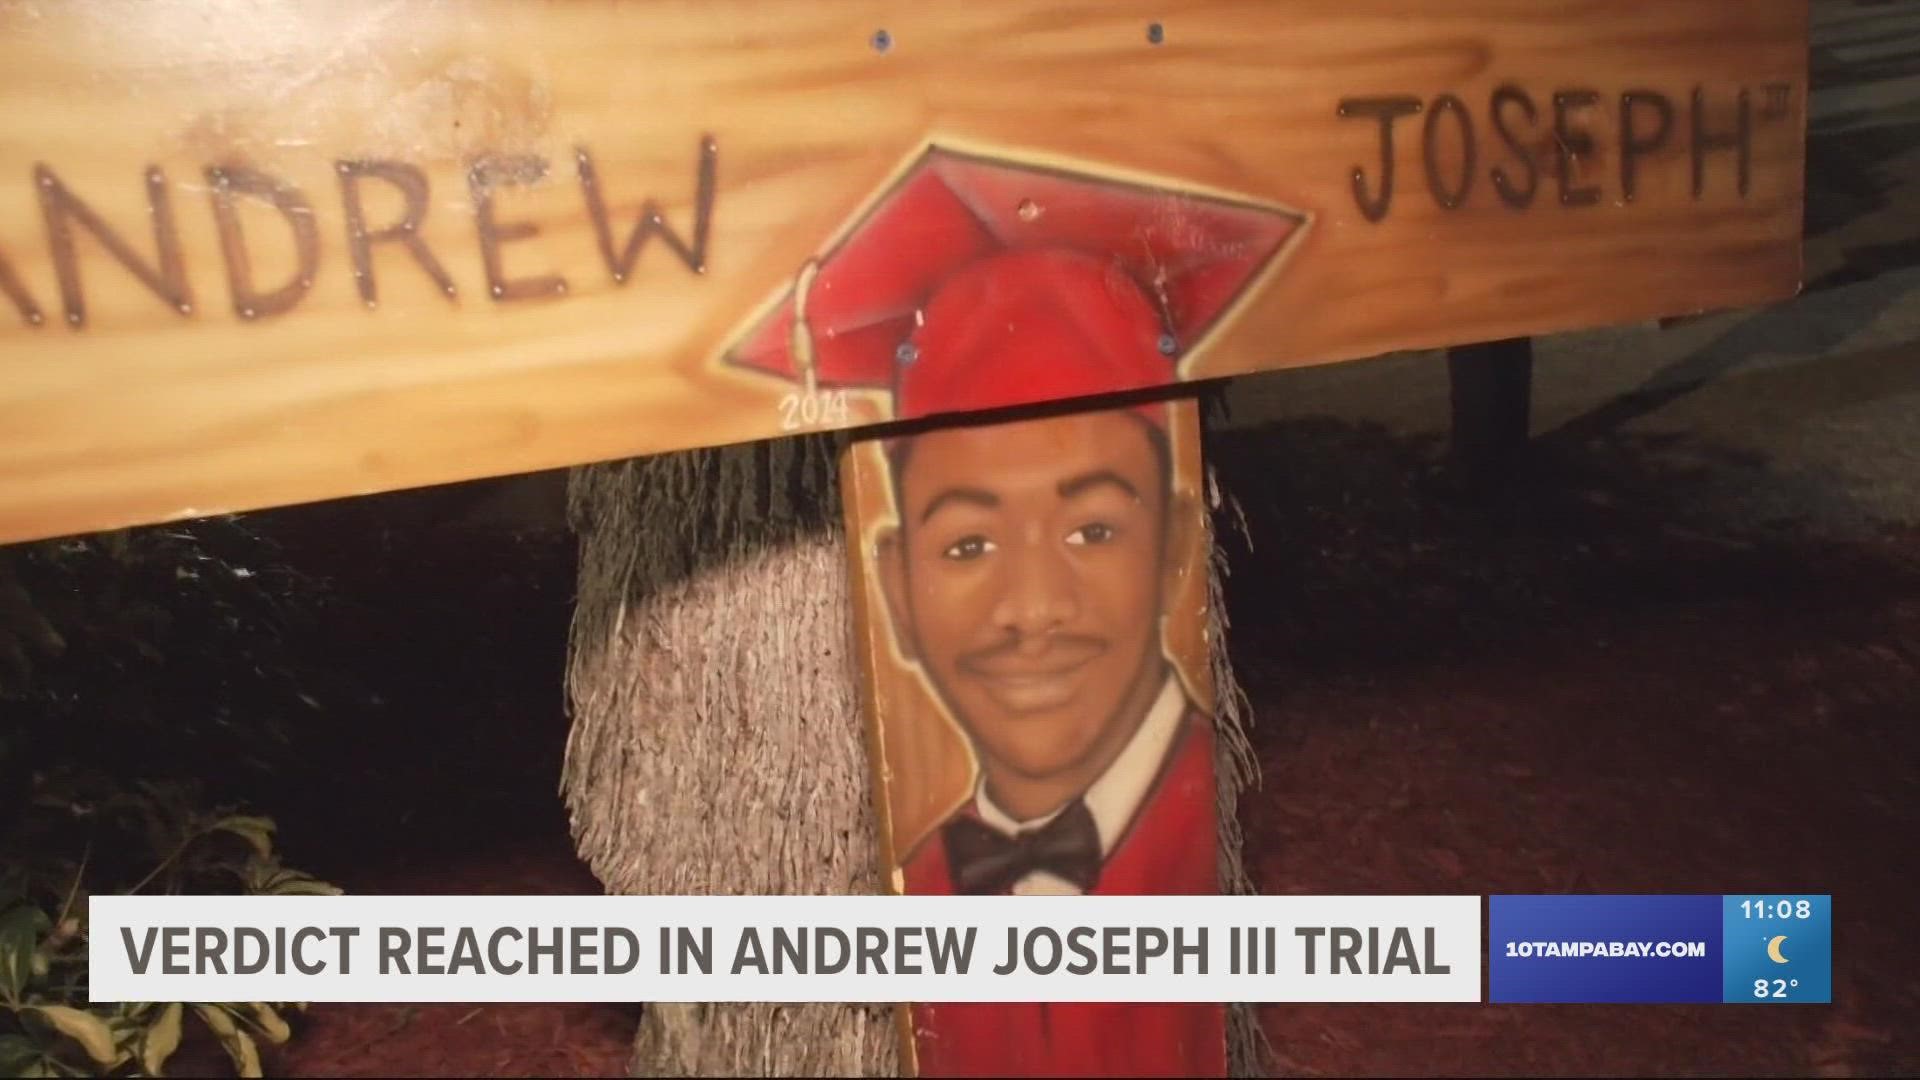 The jury ultimately found HCSO responsible for 90 percent while they found Andrew Joseph III, the teen who died, 10 percent responsible.